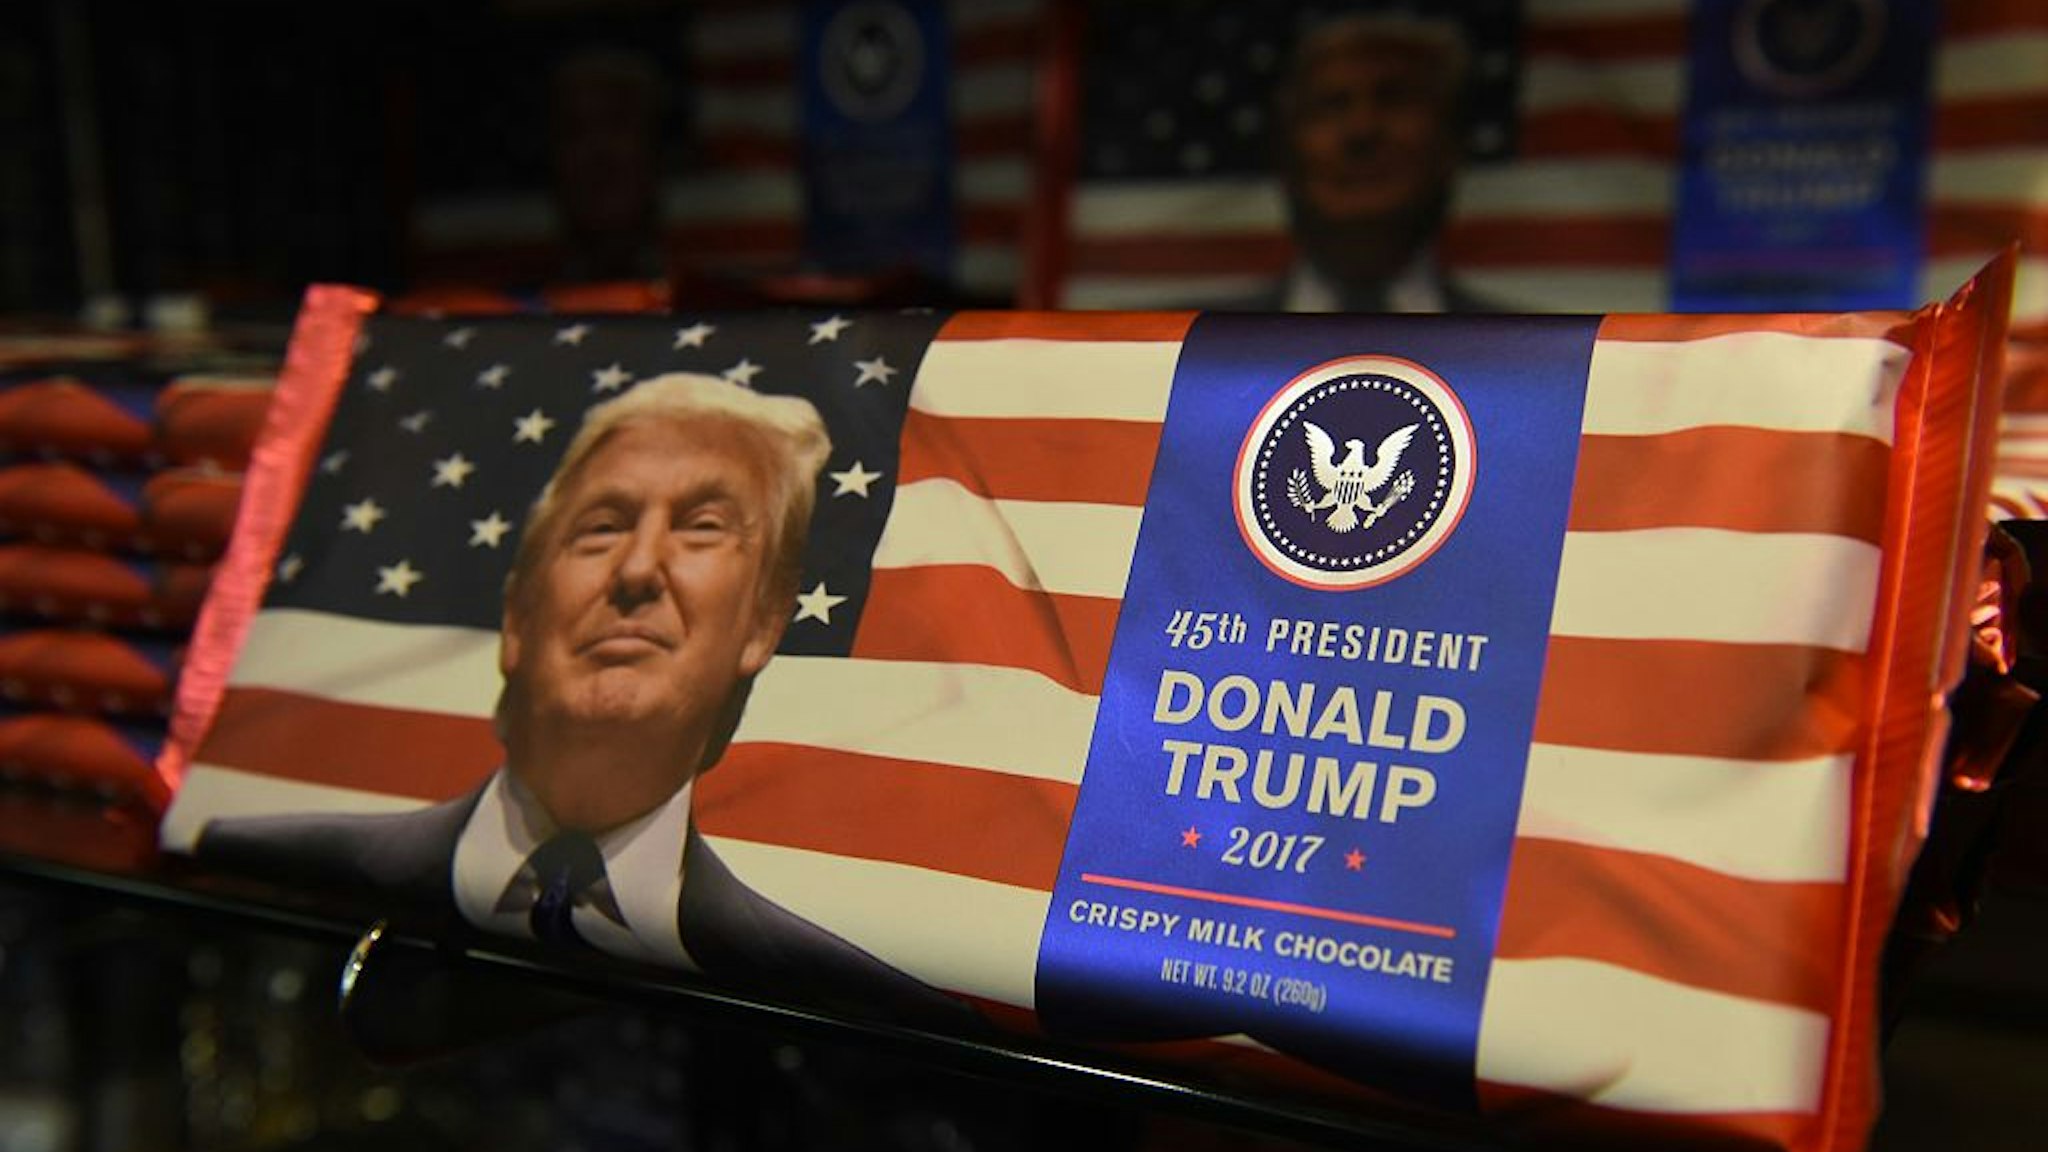 Donald Trump chocolate bars are for sale in a Washington, DC gift shop one day ahead of the inauguration of the US President-elect, January 19, 2017.